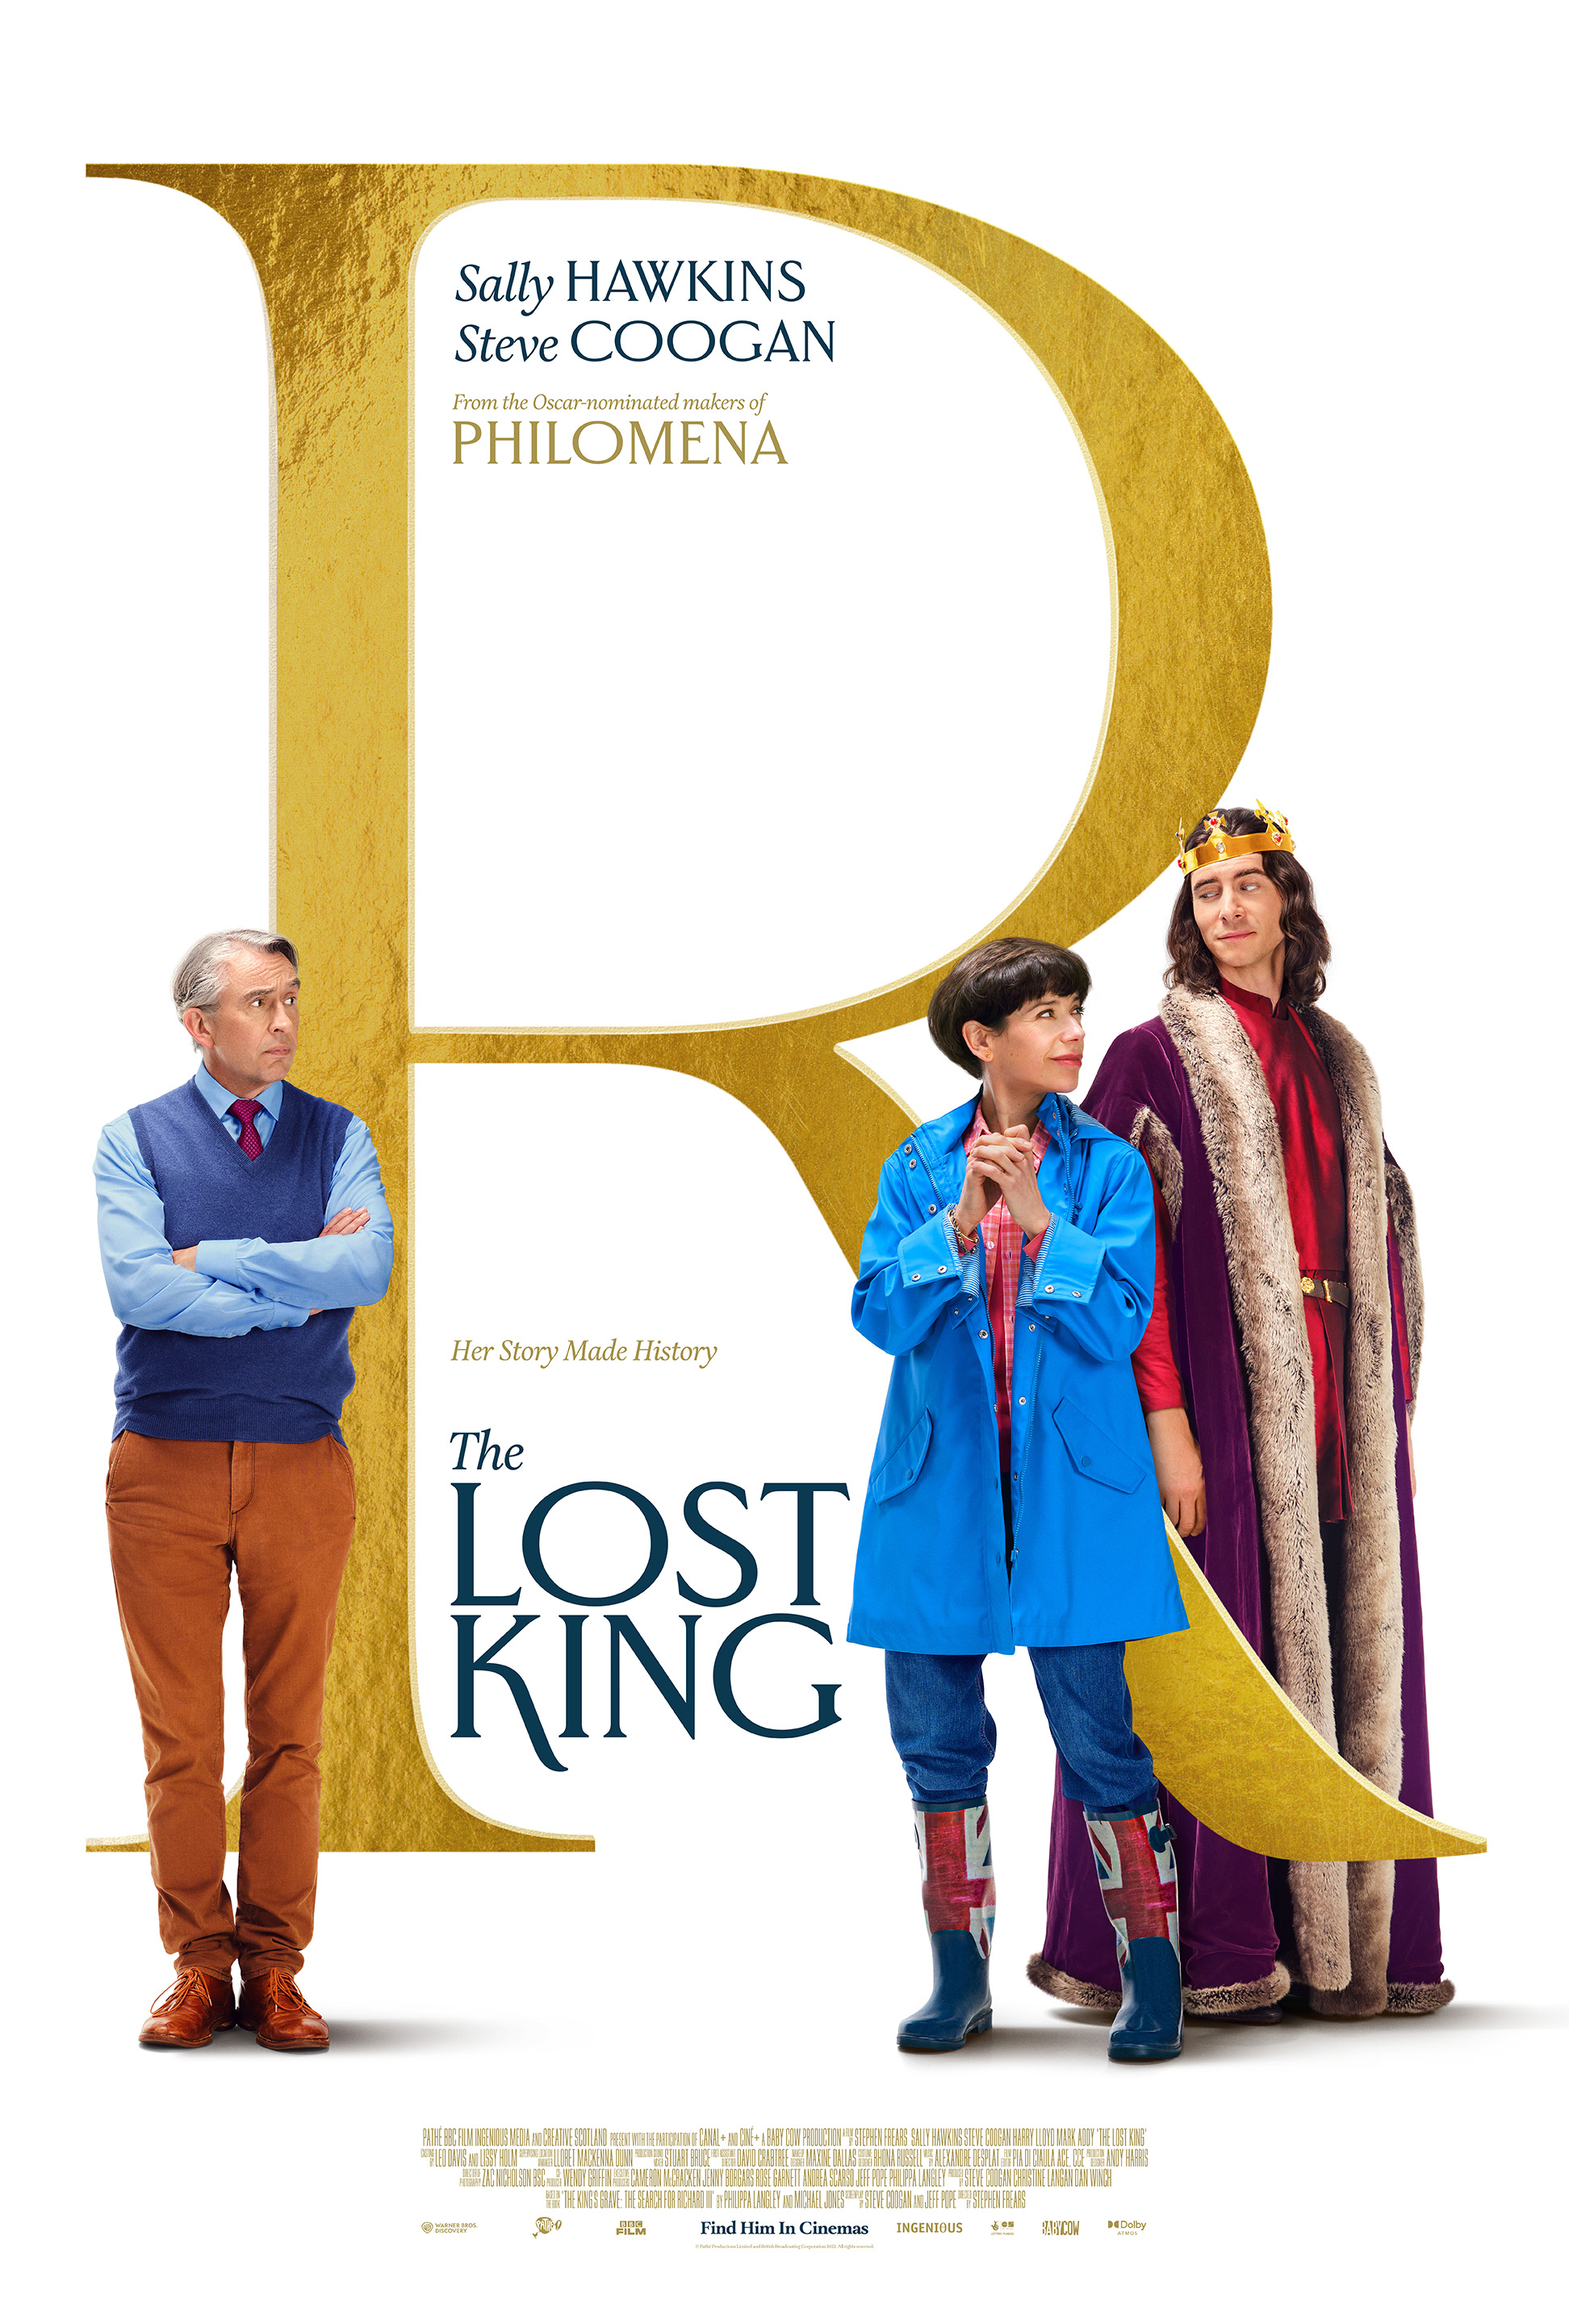 Book to Film Club (The Lost King)